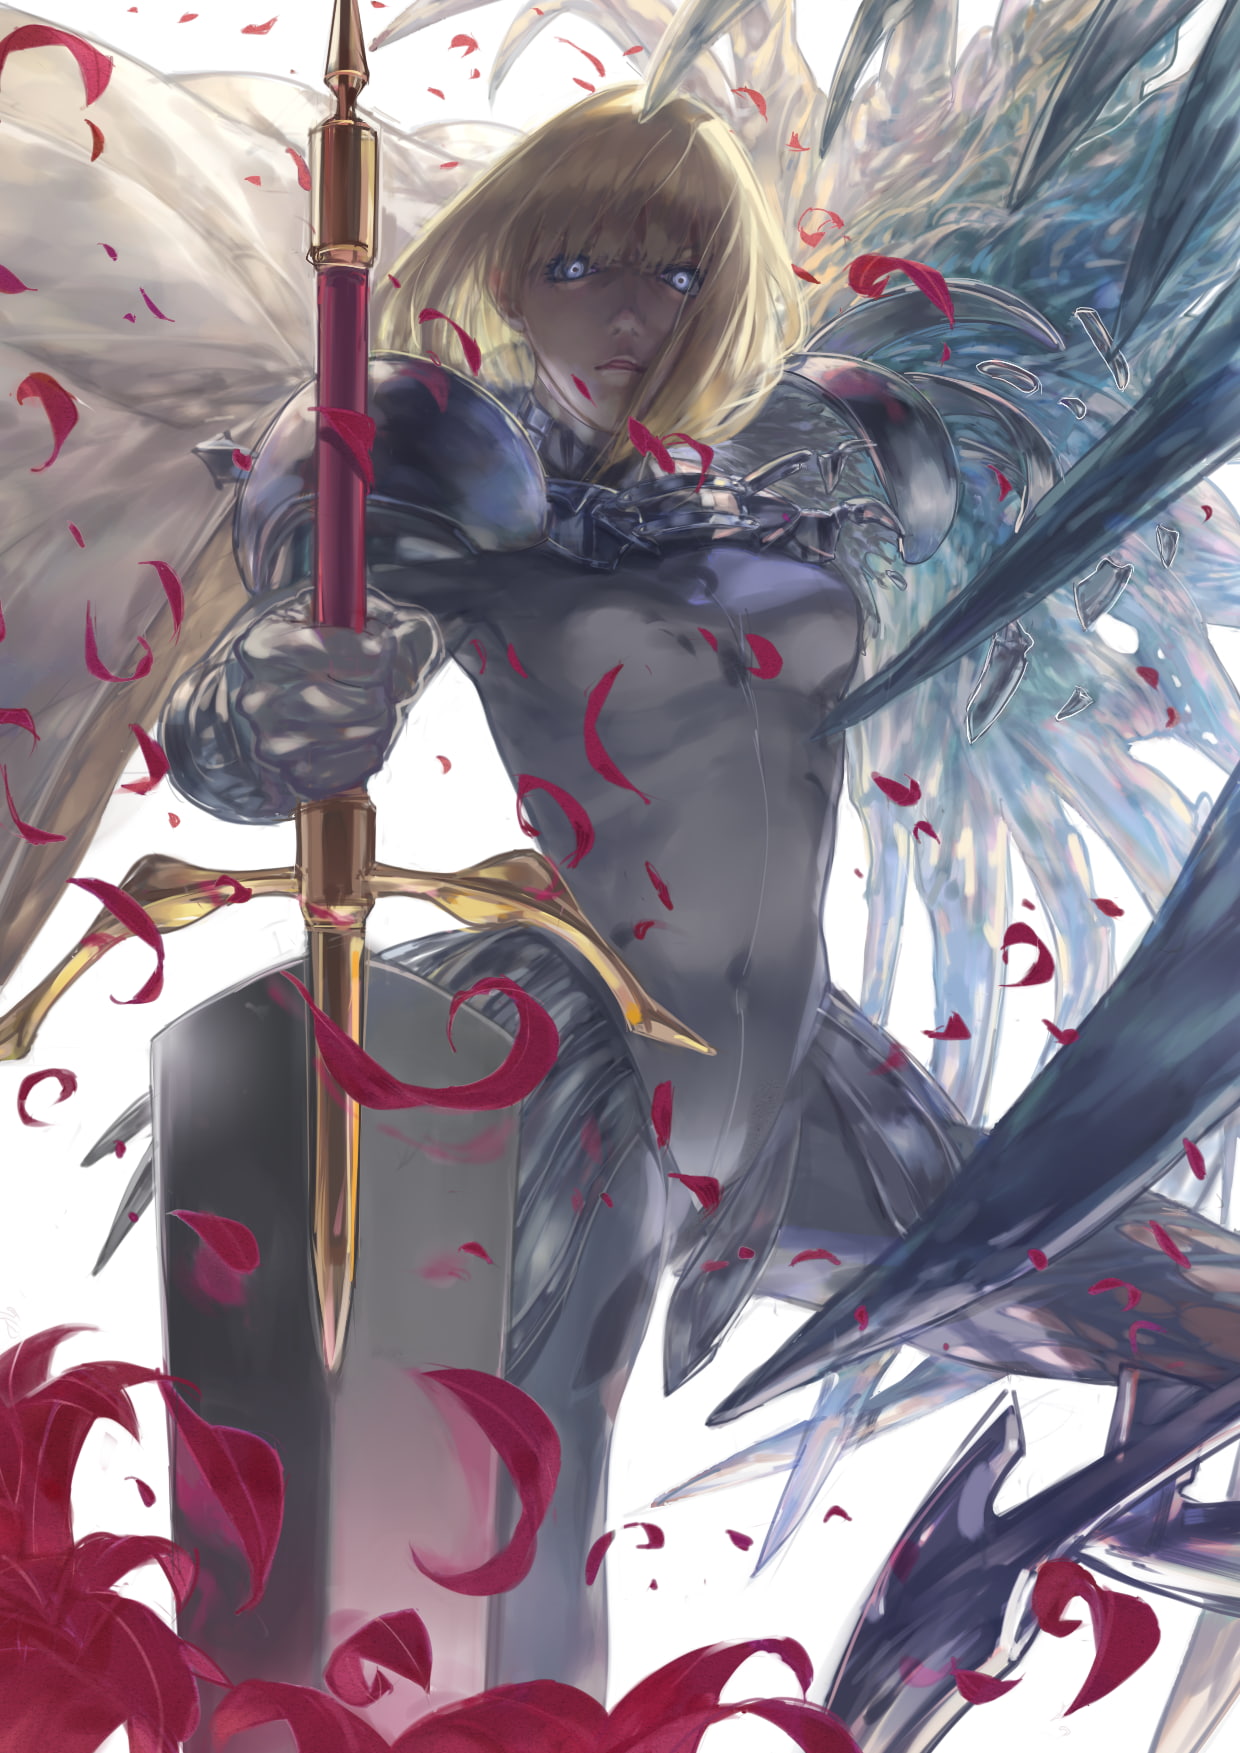 Claymore (anime), anime girls, Clare